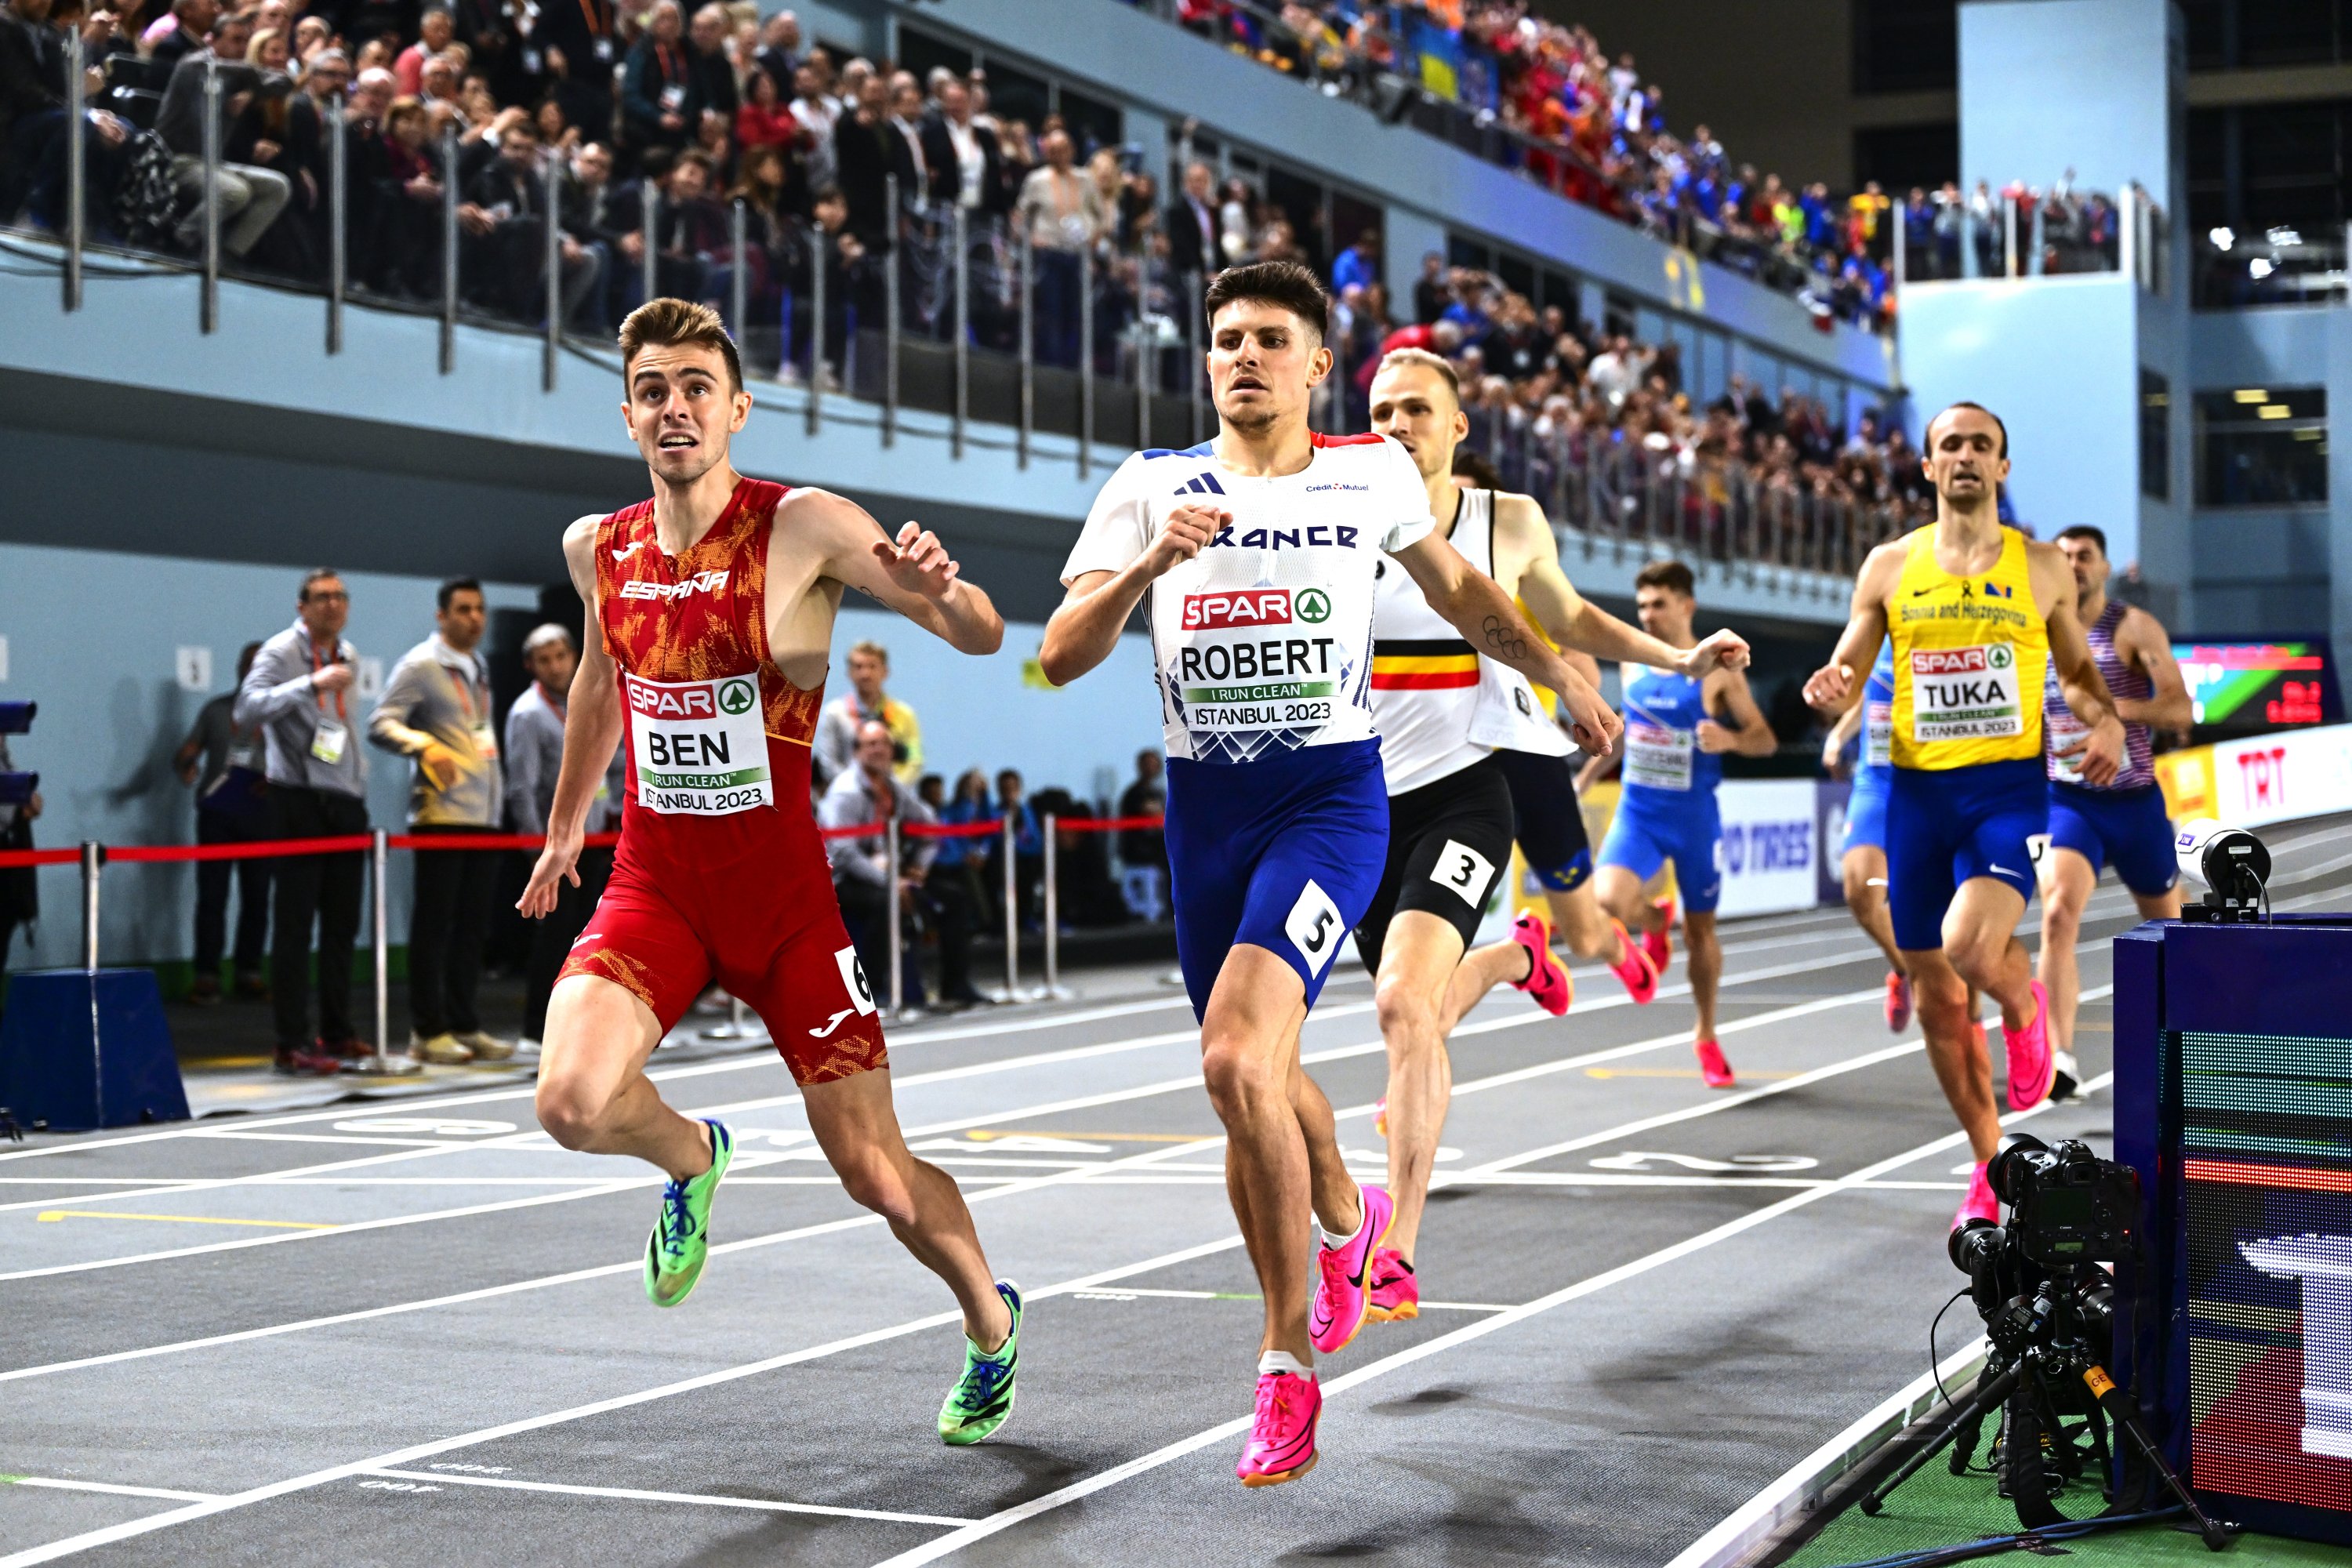 Records tumble at Istanbul's 2023 European Indoor Athletics Daily Sabah